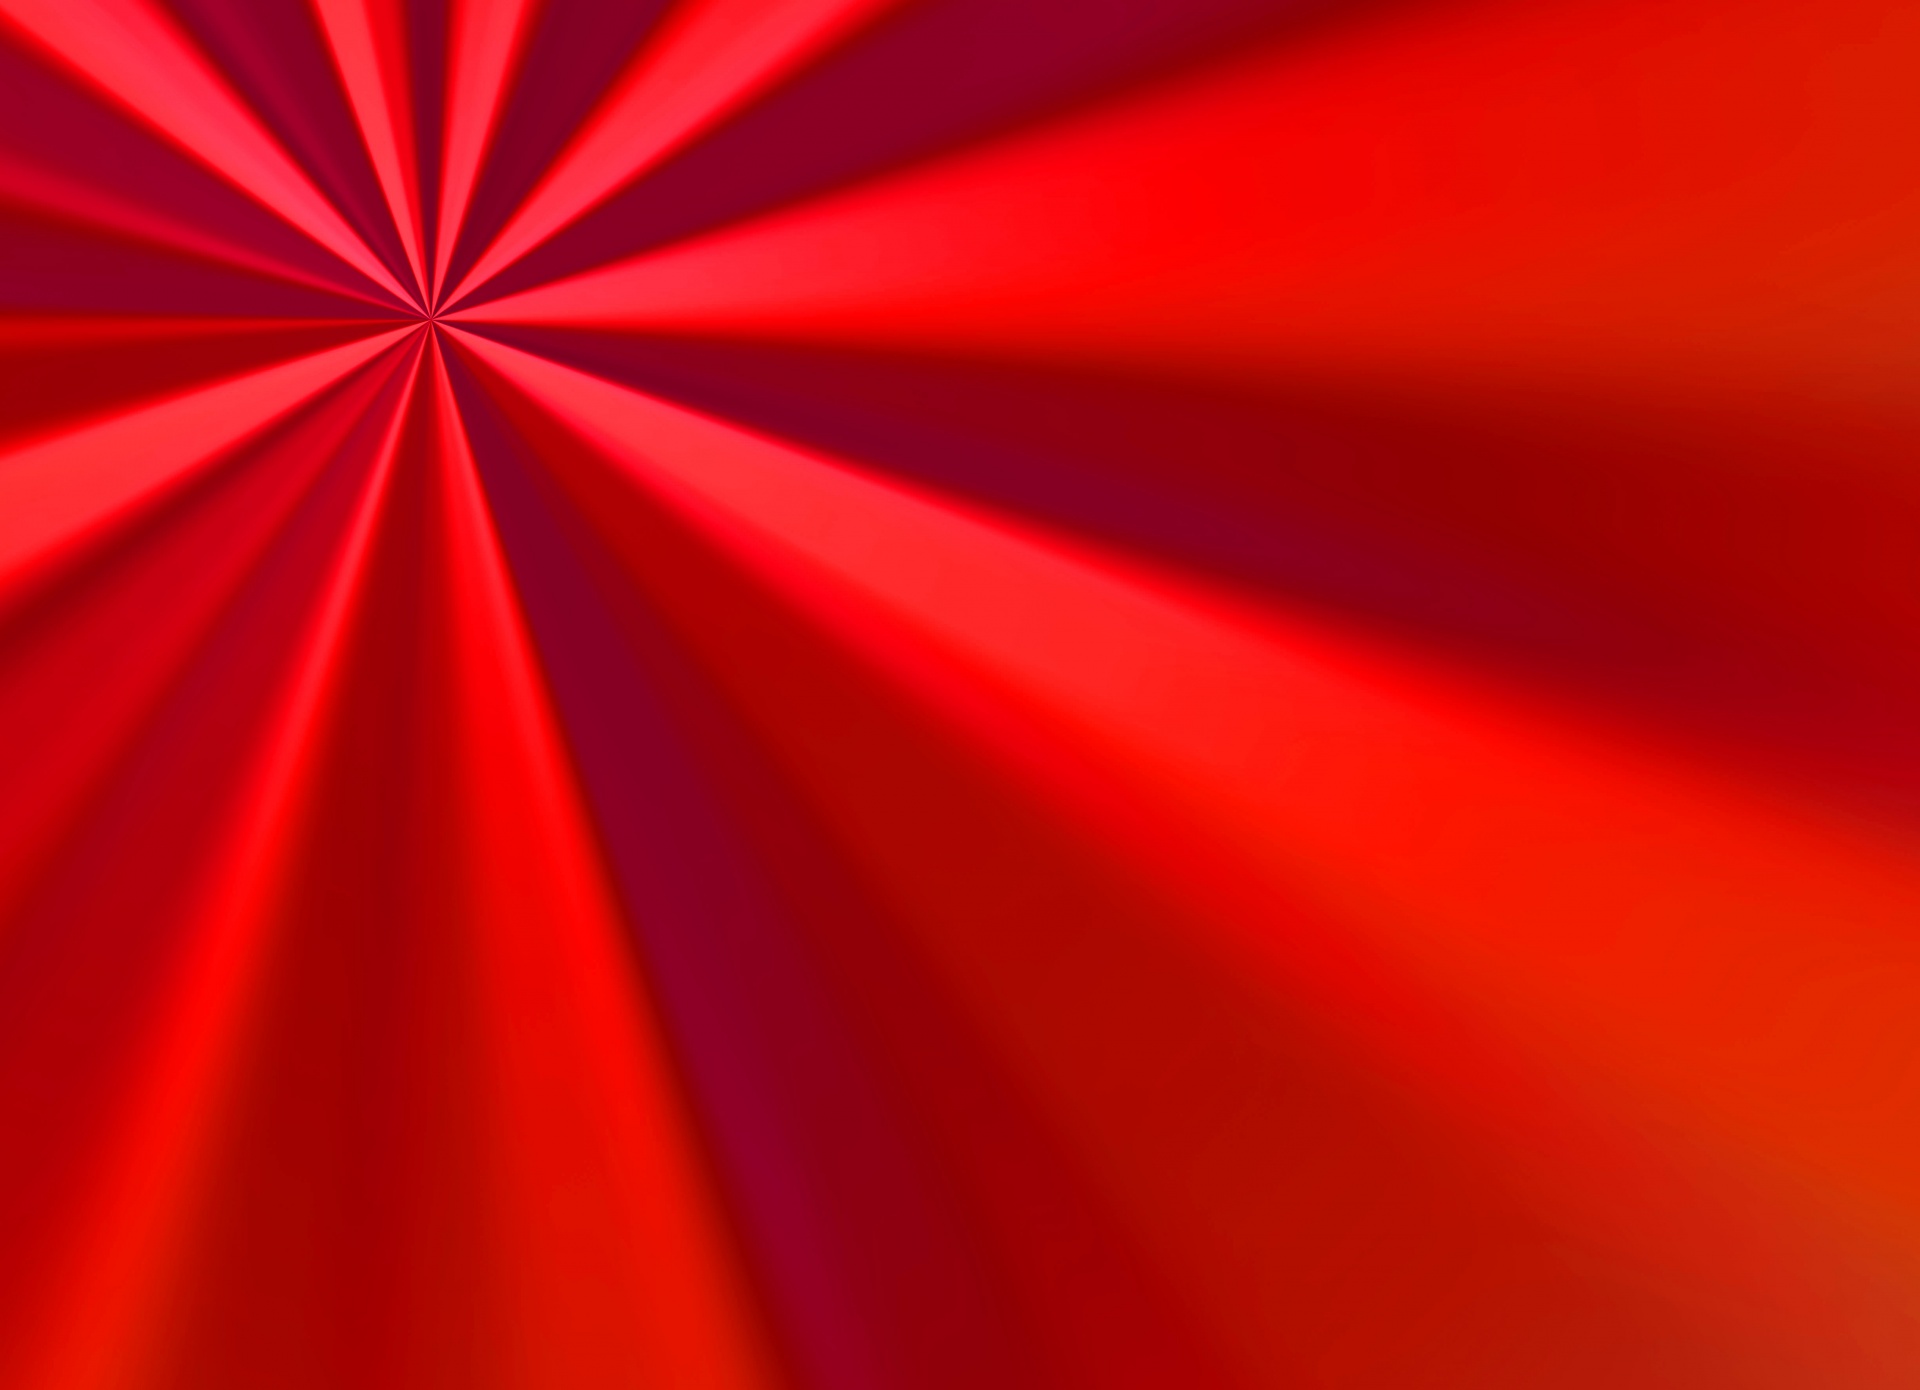 Download free photo of Background,sunburst,red,sun,sun rays - from  